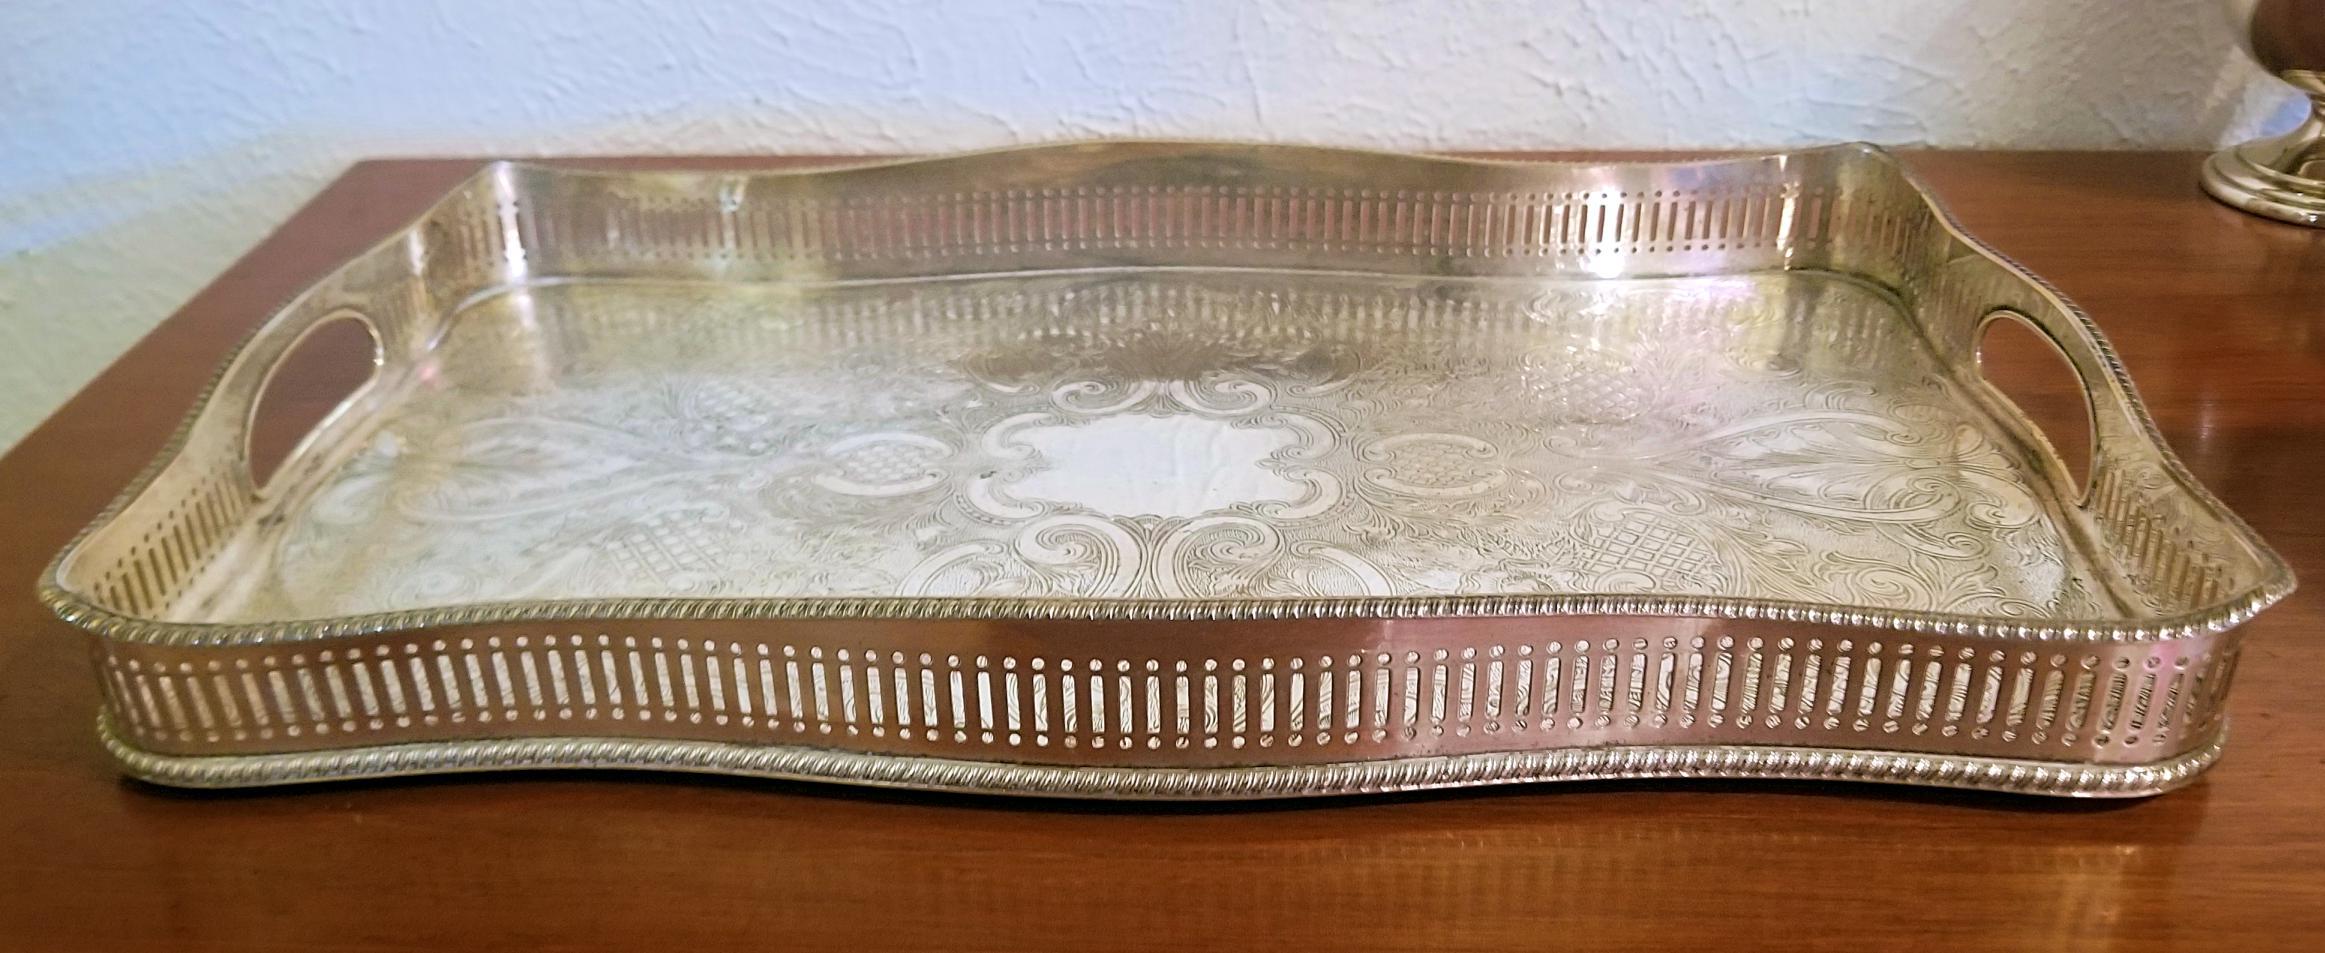 19th Century British Old Sheffield Plated Silver Heavily Engraved Serving Tray 3